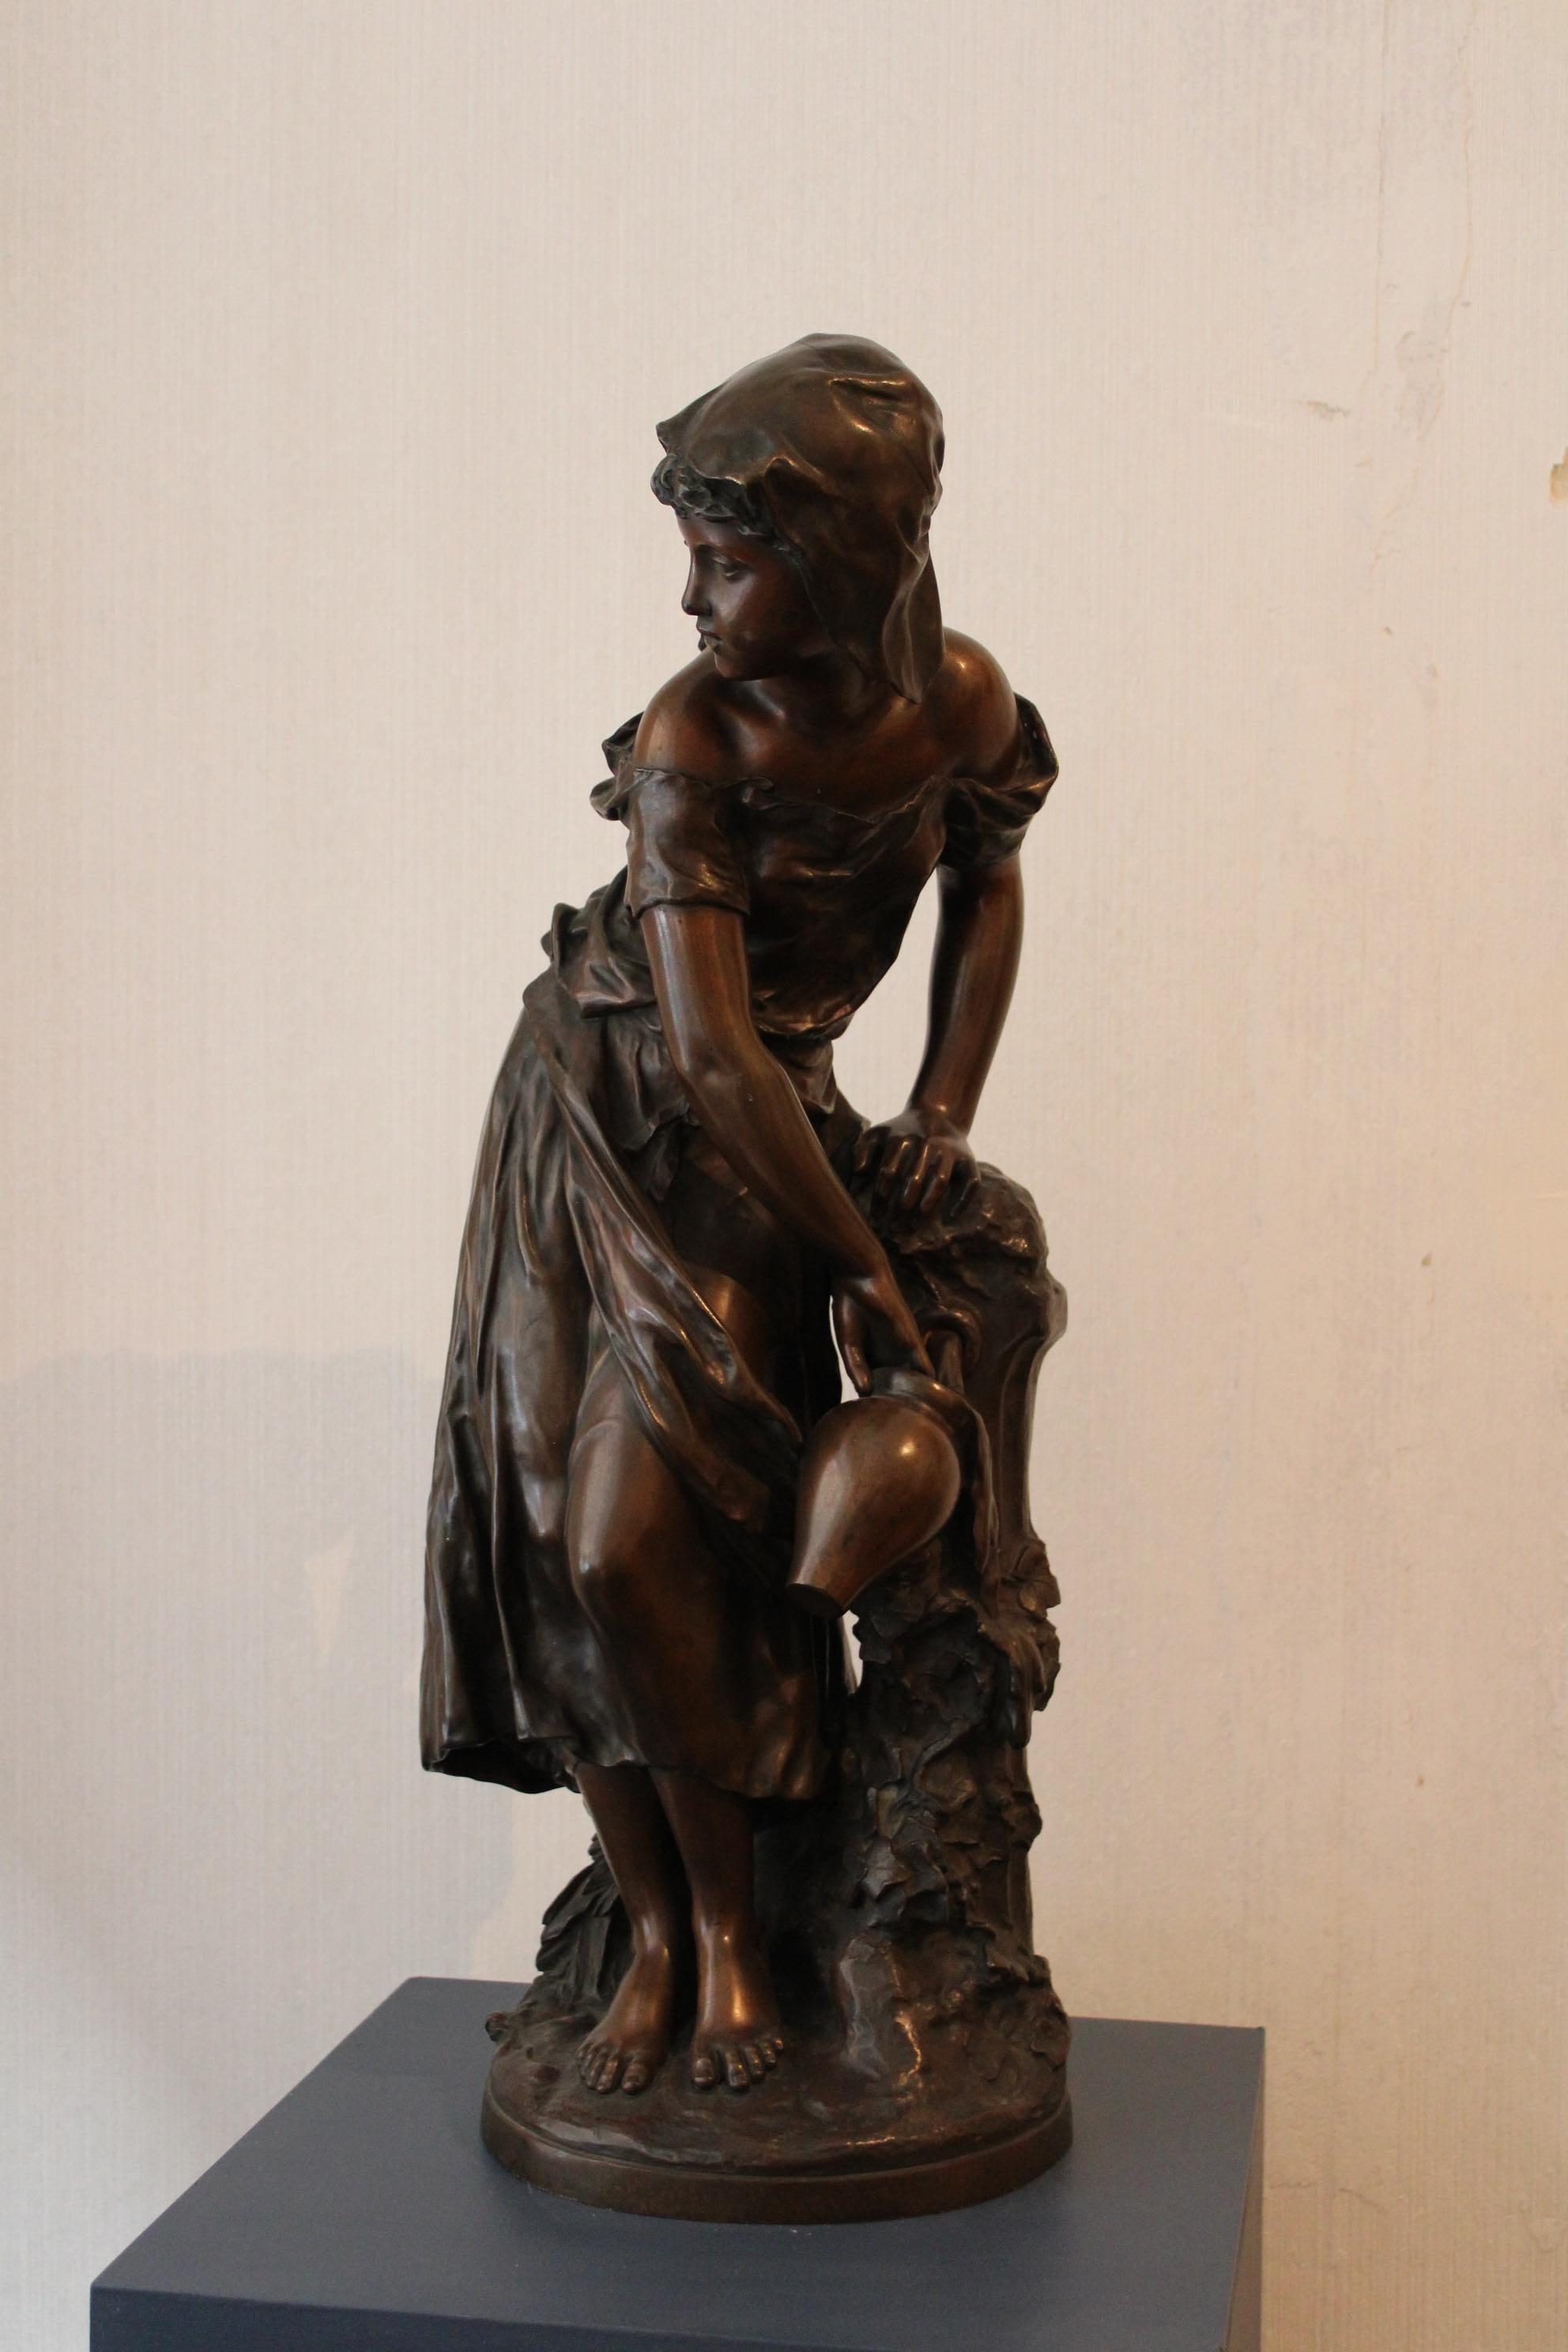 Bronze by Mathurin Moreau (1822-1912)
Young woman at the fountain
Bronze with brown patina
Signed 